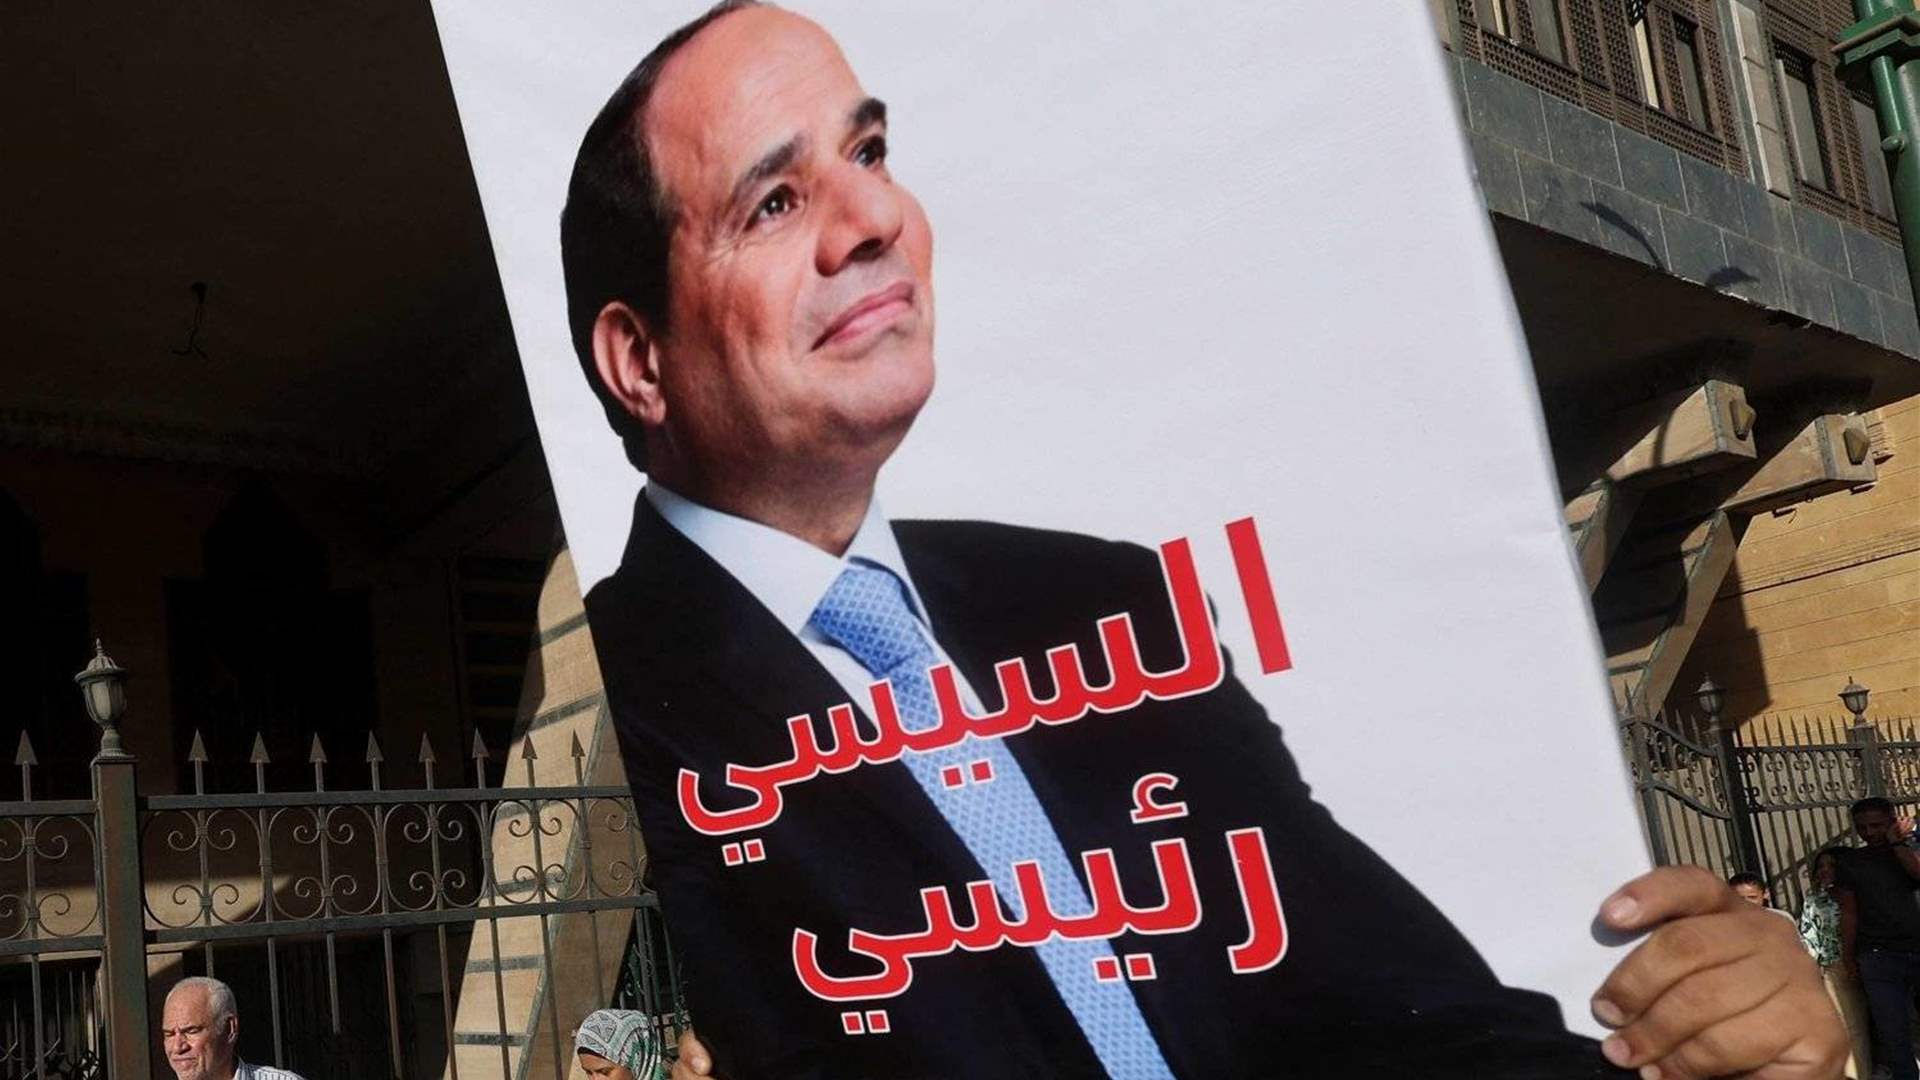 Thousands rally in Egypt urging President el-Sisi to run for third term